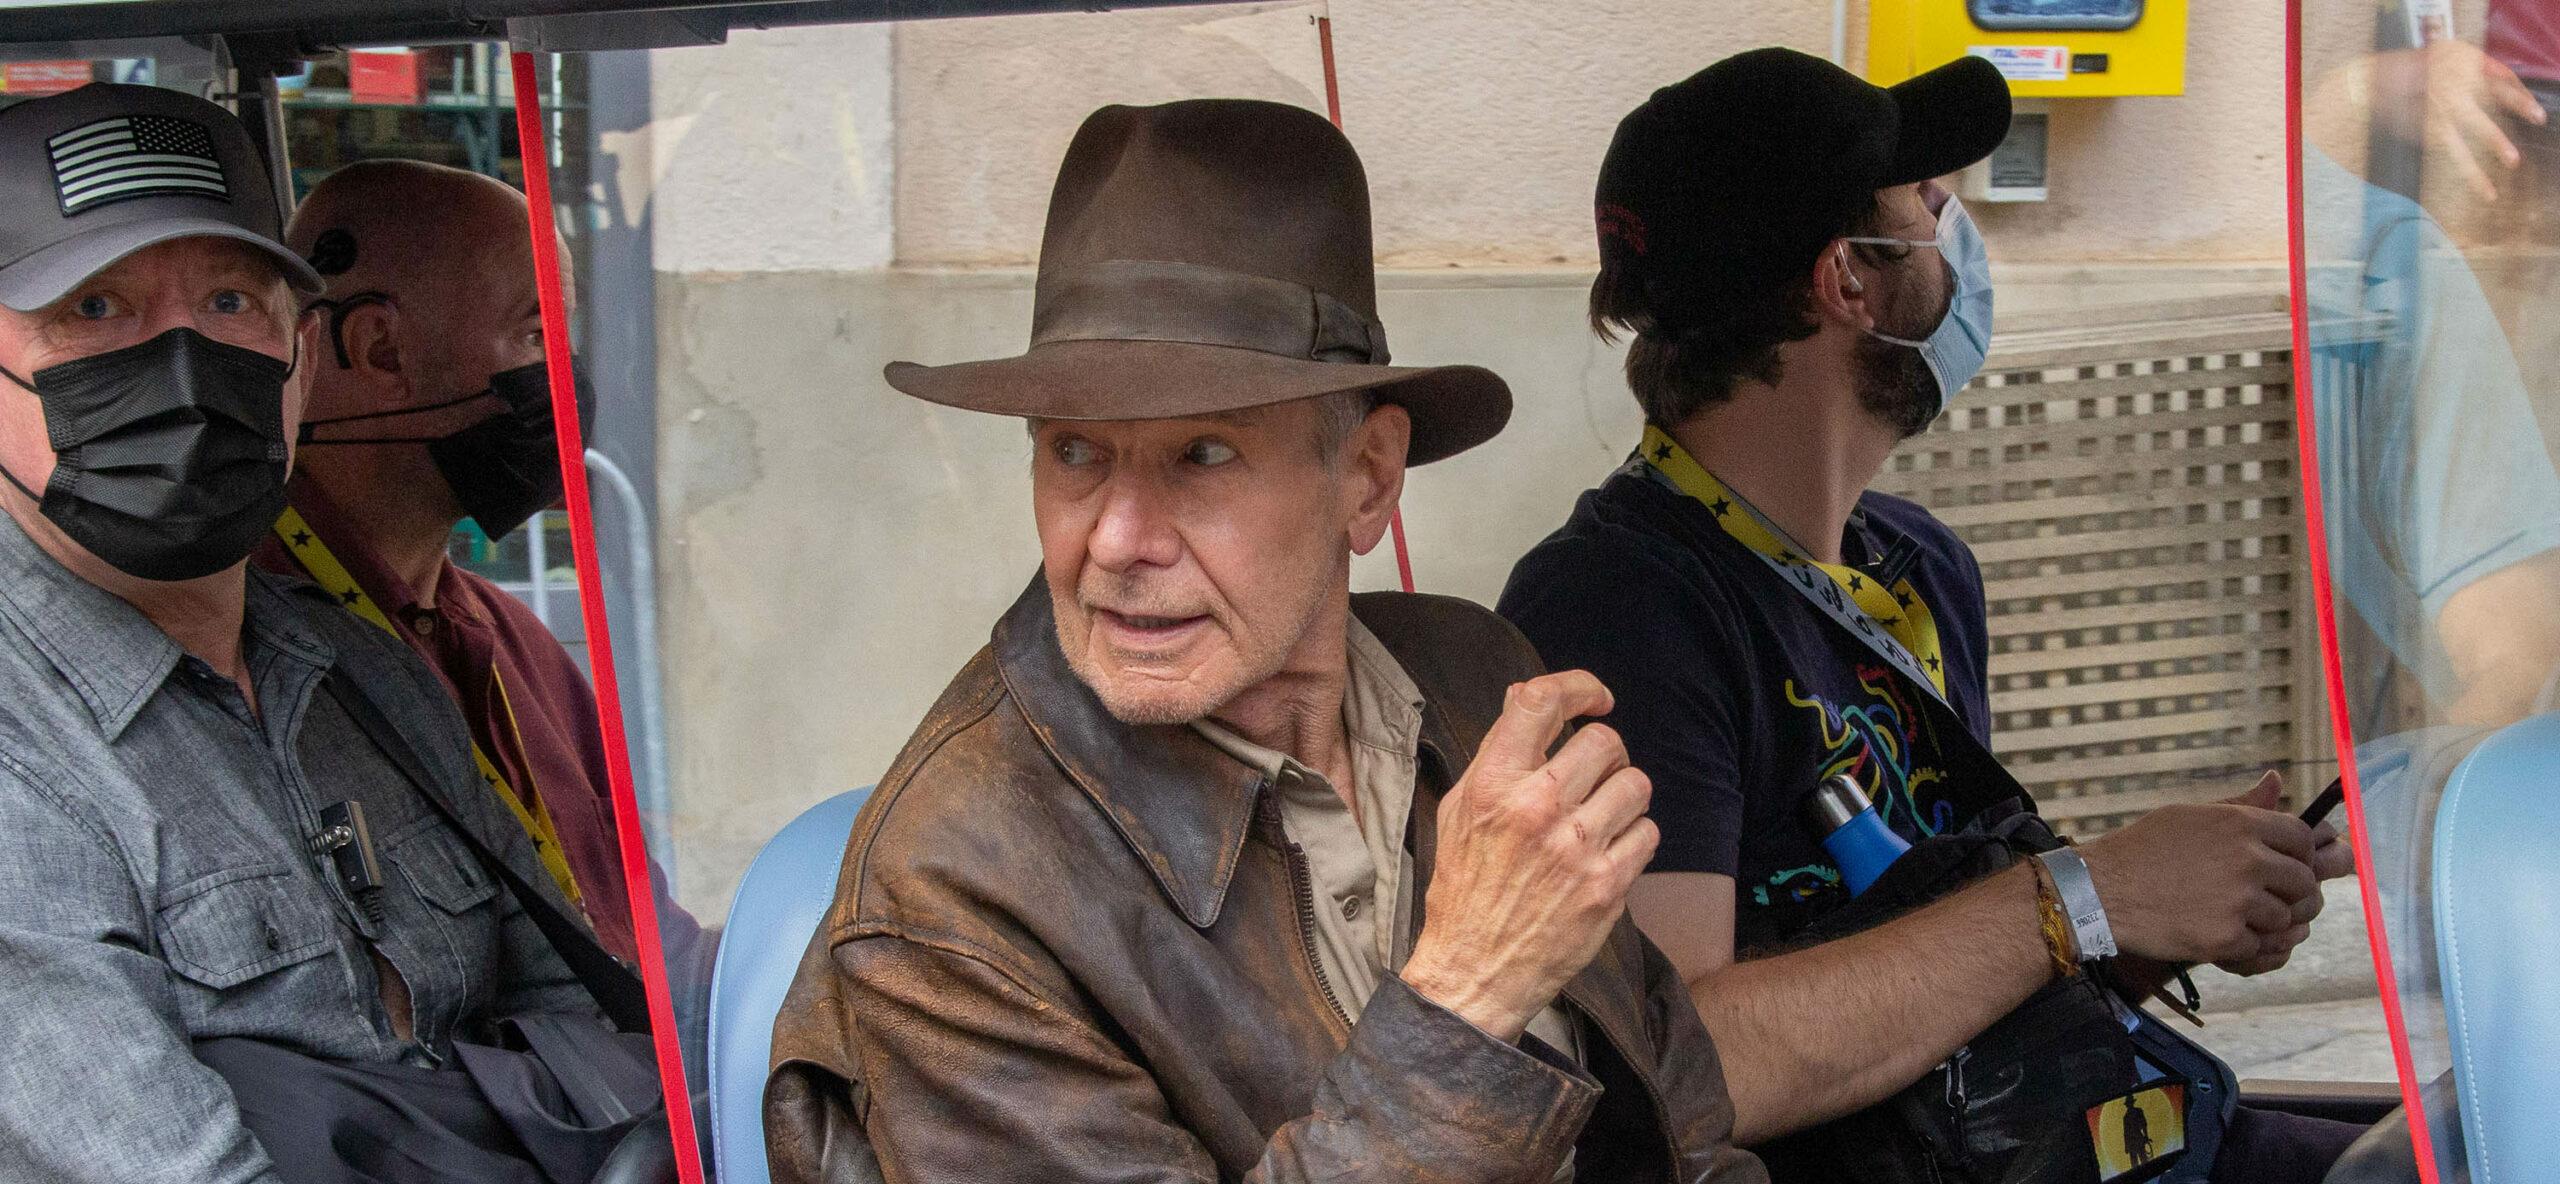 Harrison Ford filming Indiana Jones 5 in Cefalù, Sicily